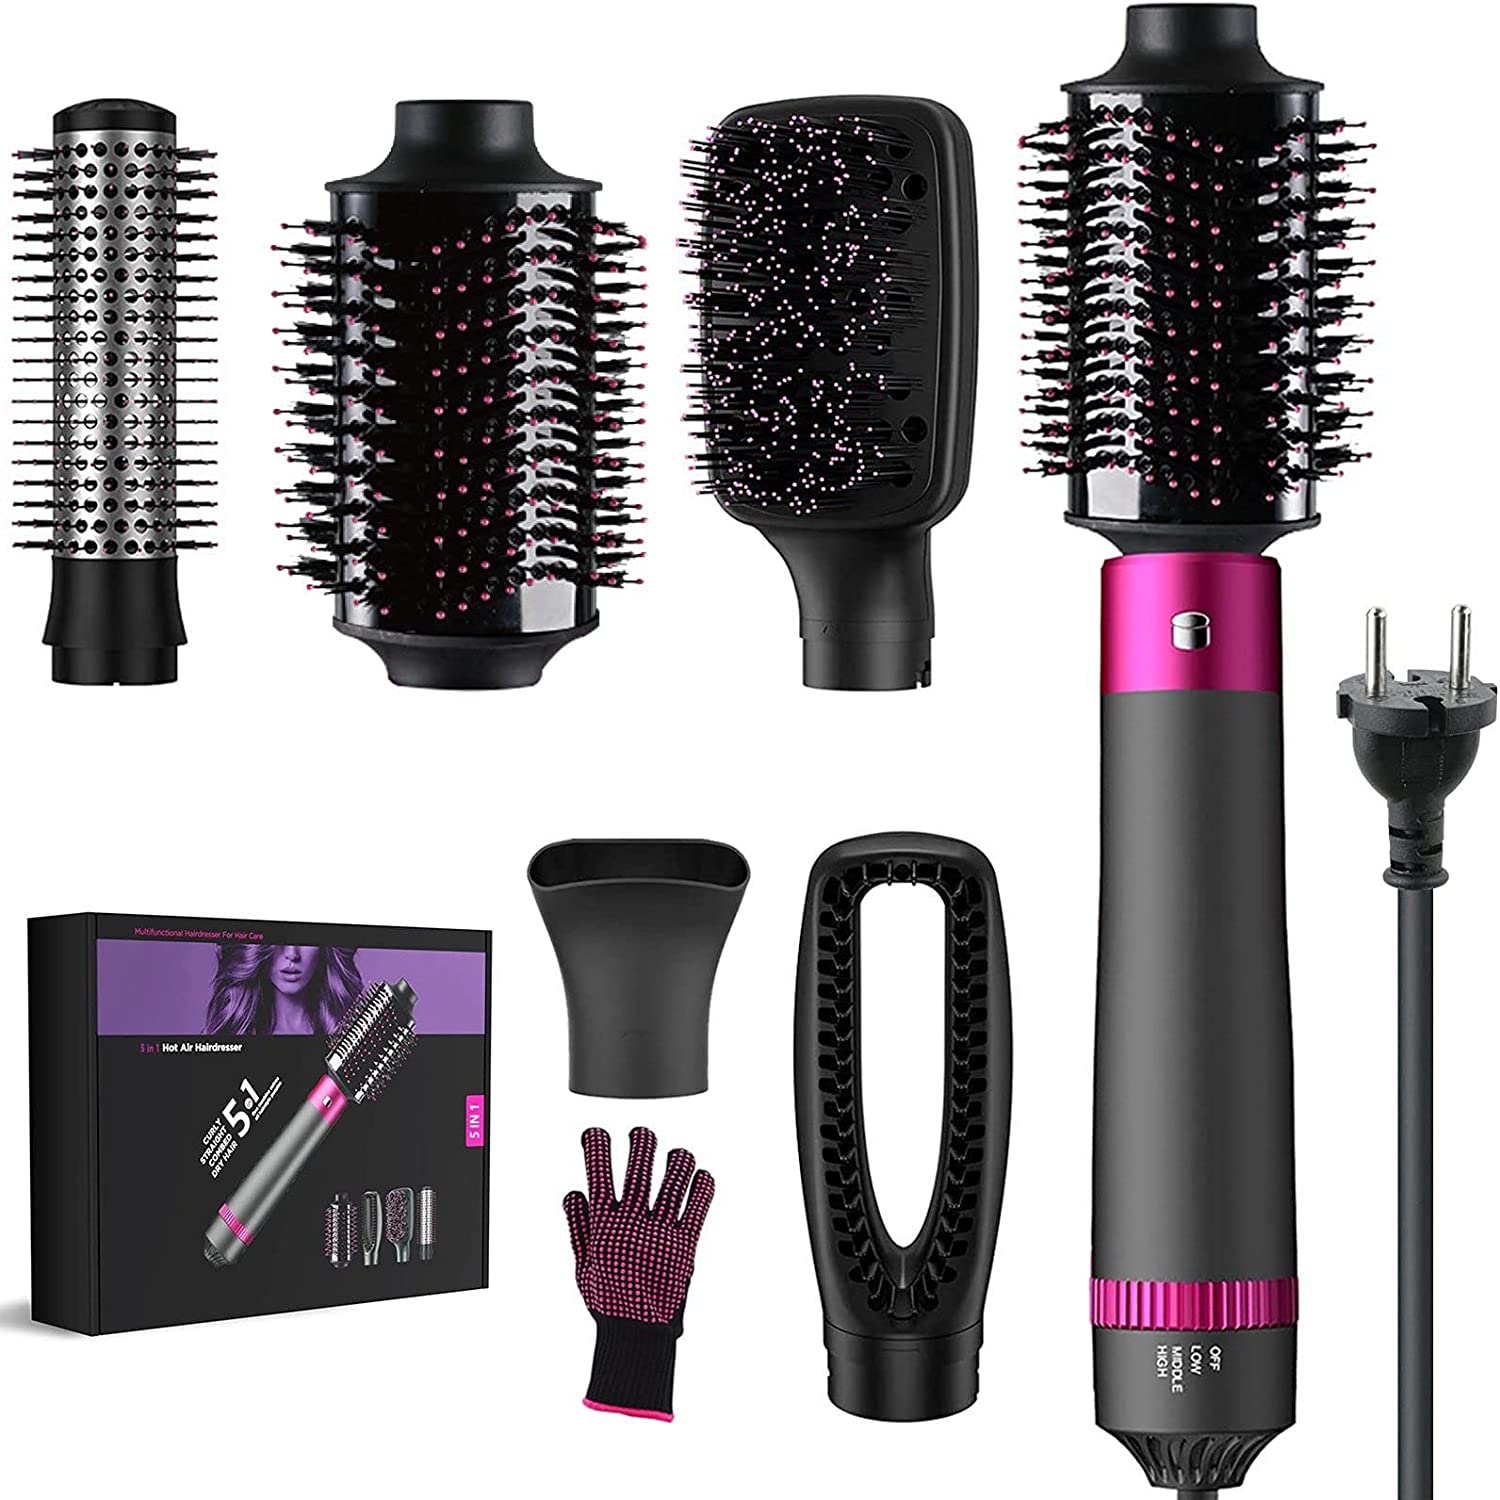 iceagle Hair Dryer Hot Air Brush Set, 5 in 1 Hair Dryer Brush with 5 Interchangeable Barrels, Hair Styler Negative Ion Hair Dryer Curling Iron Hot Wind Combs Air Styler 1200 W